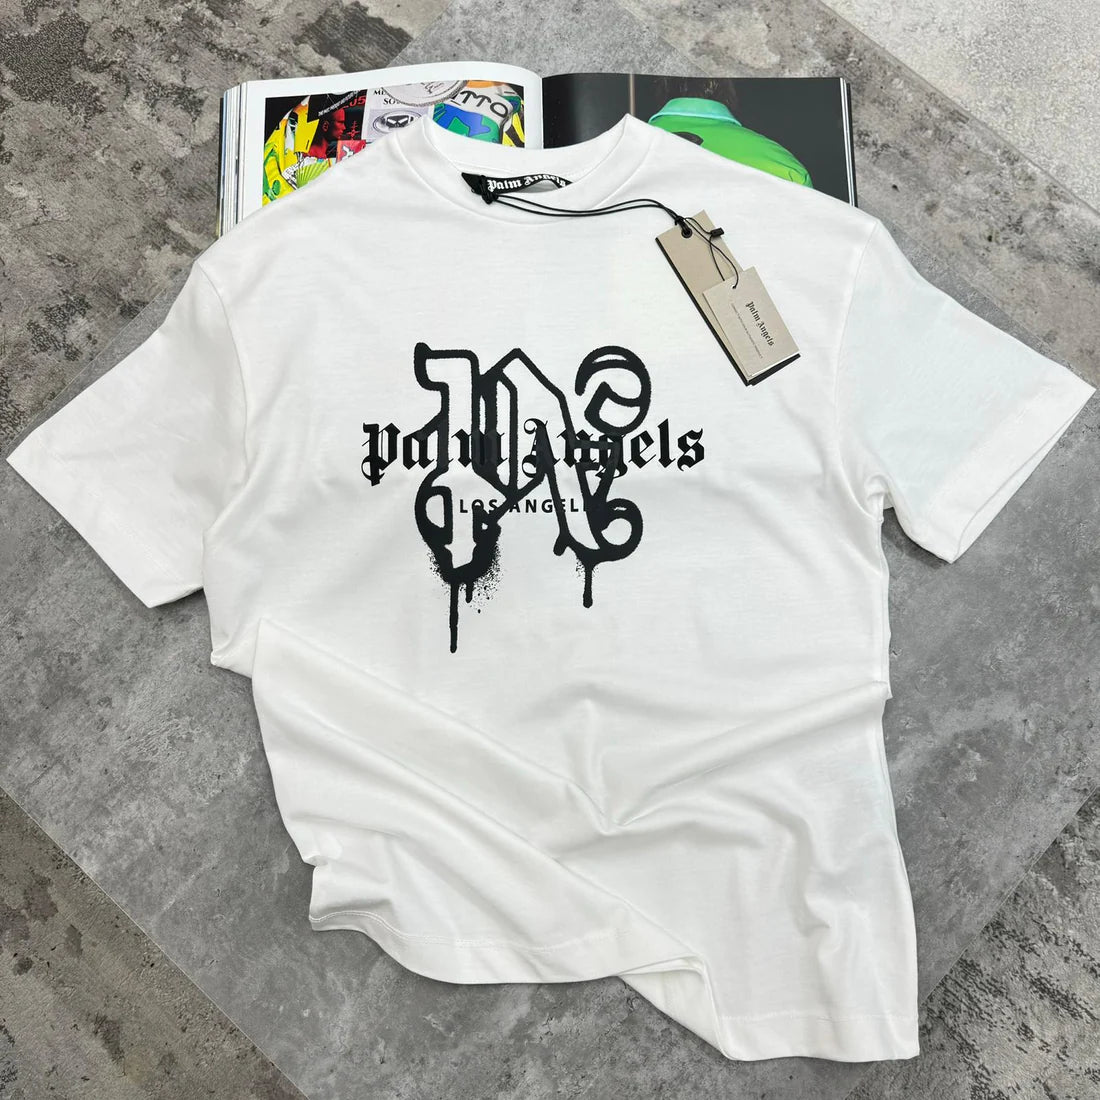 Palm angels Tshirts (click for latest available Tshirts)